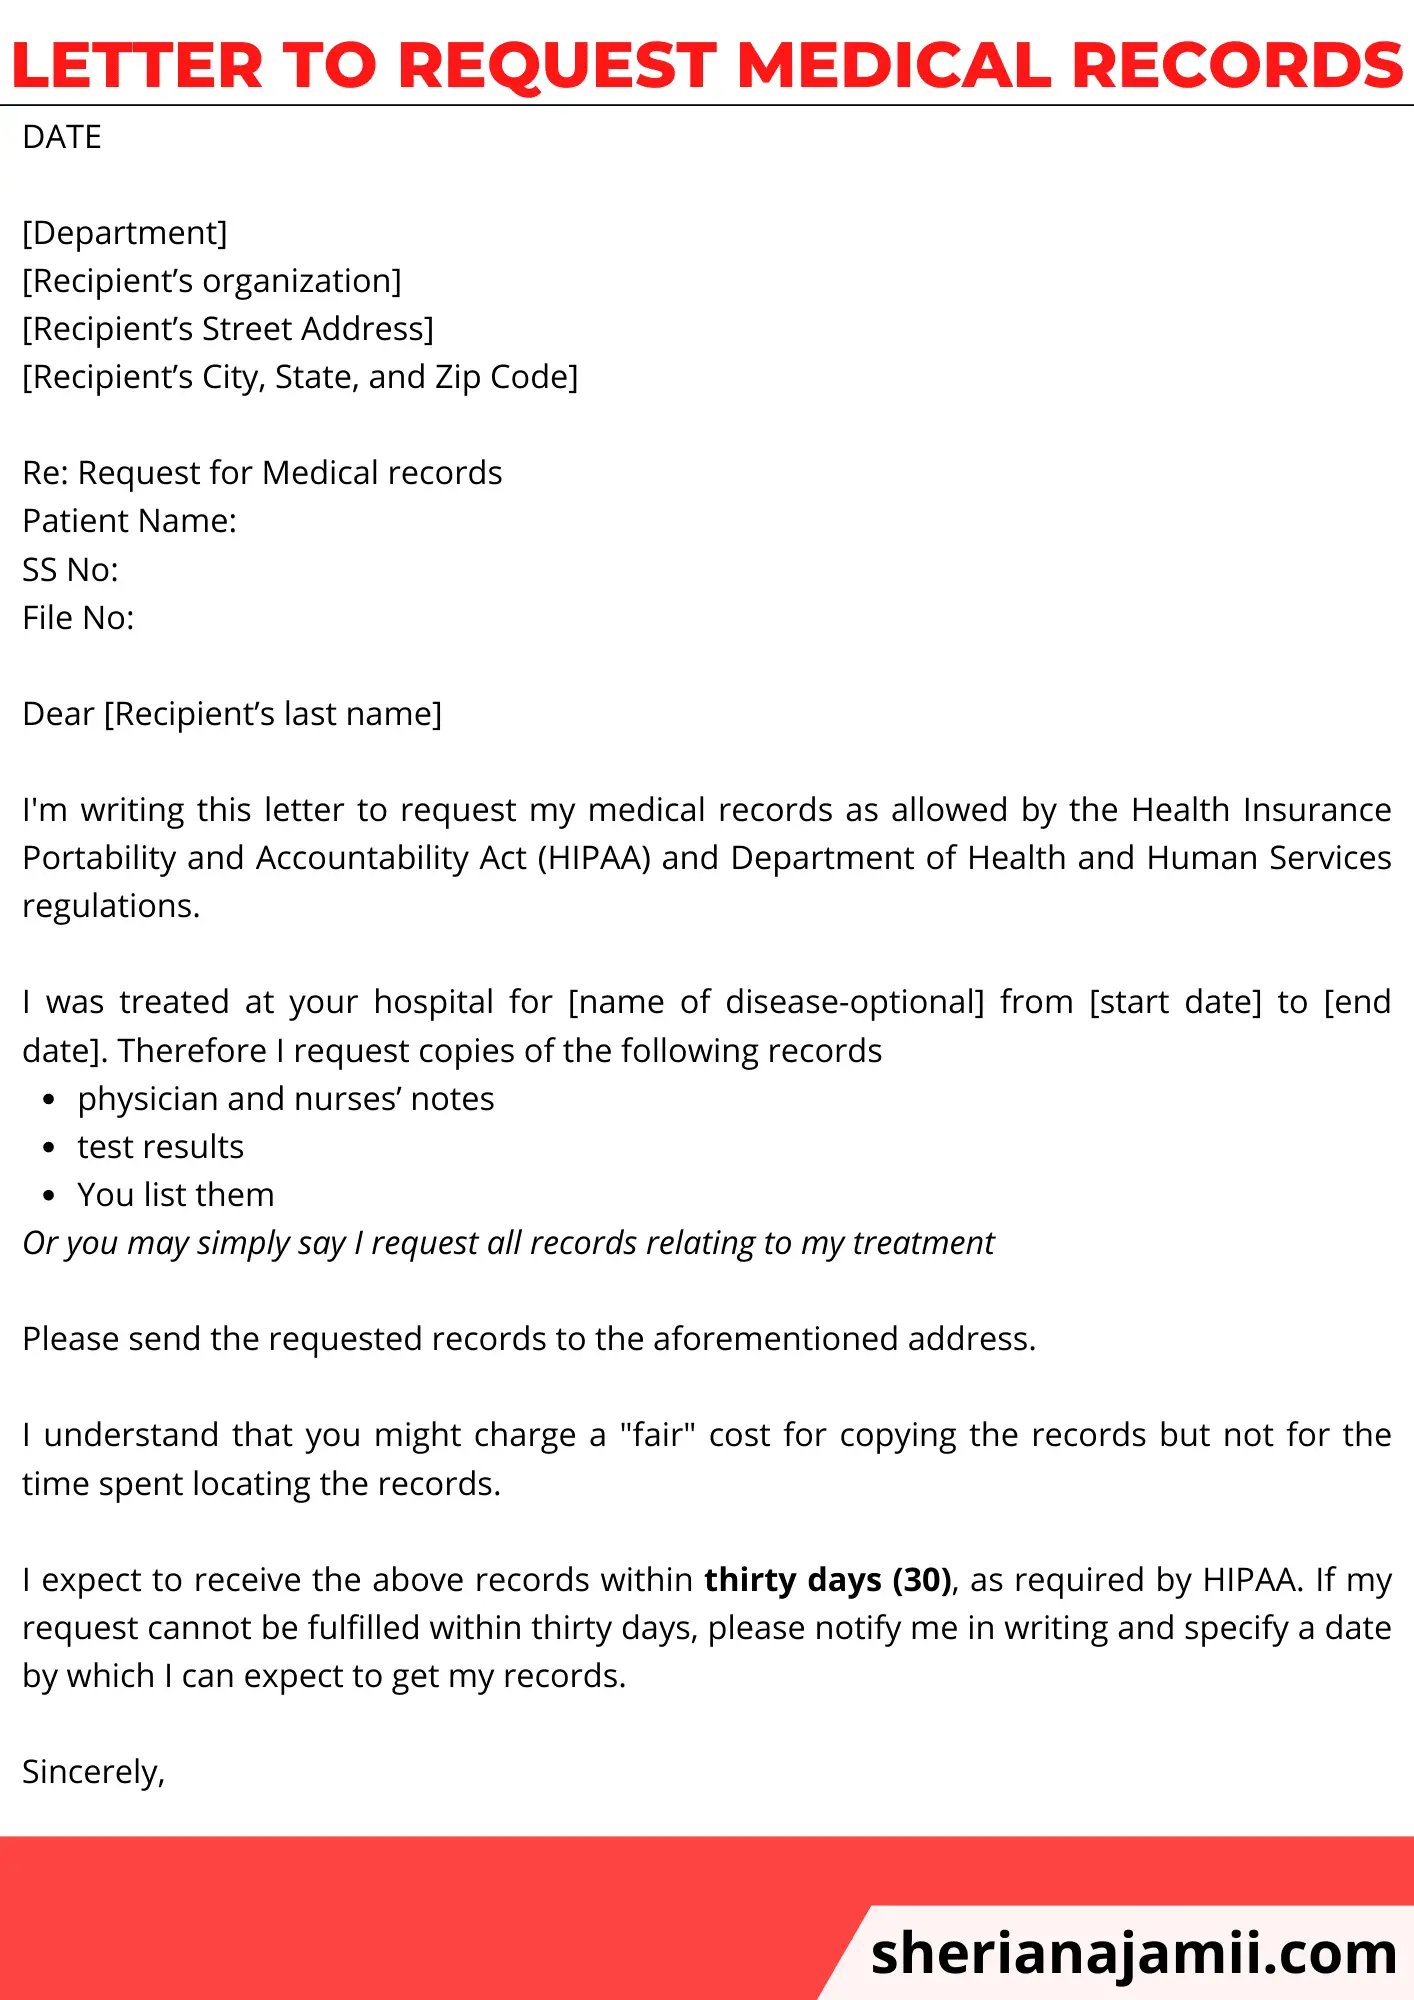 Letter to request medical records, sample Letter to request medical records